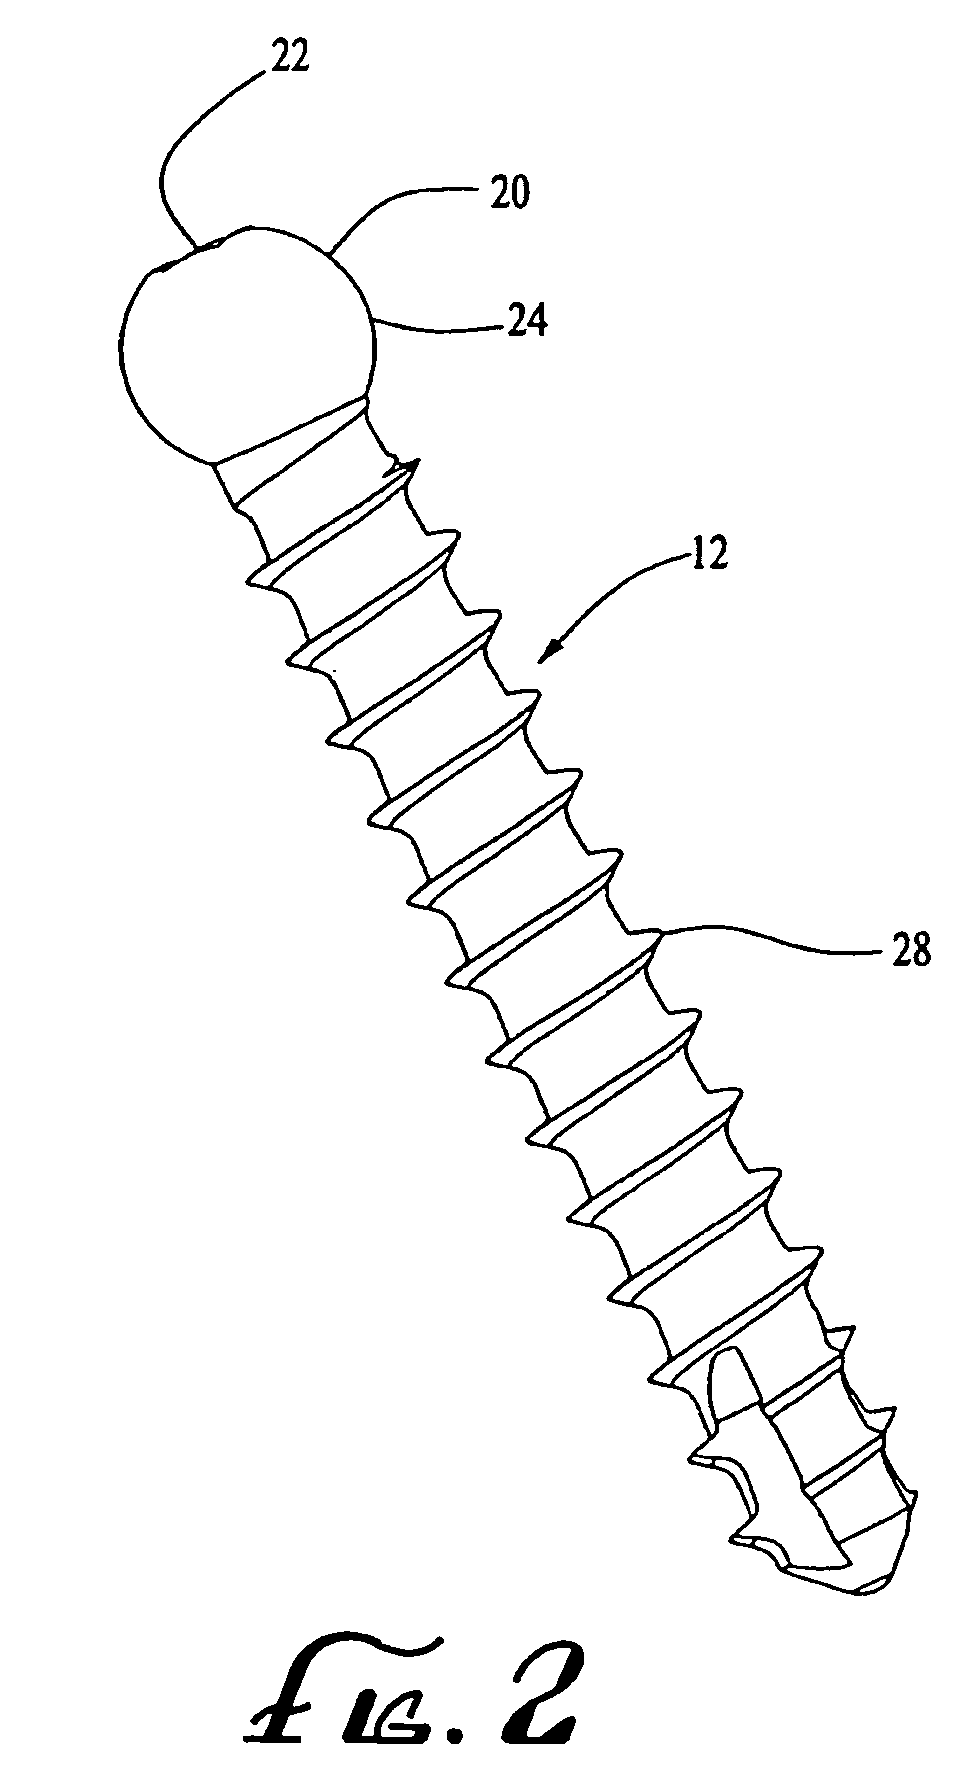 Variable angle spinal screw assembly